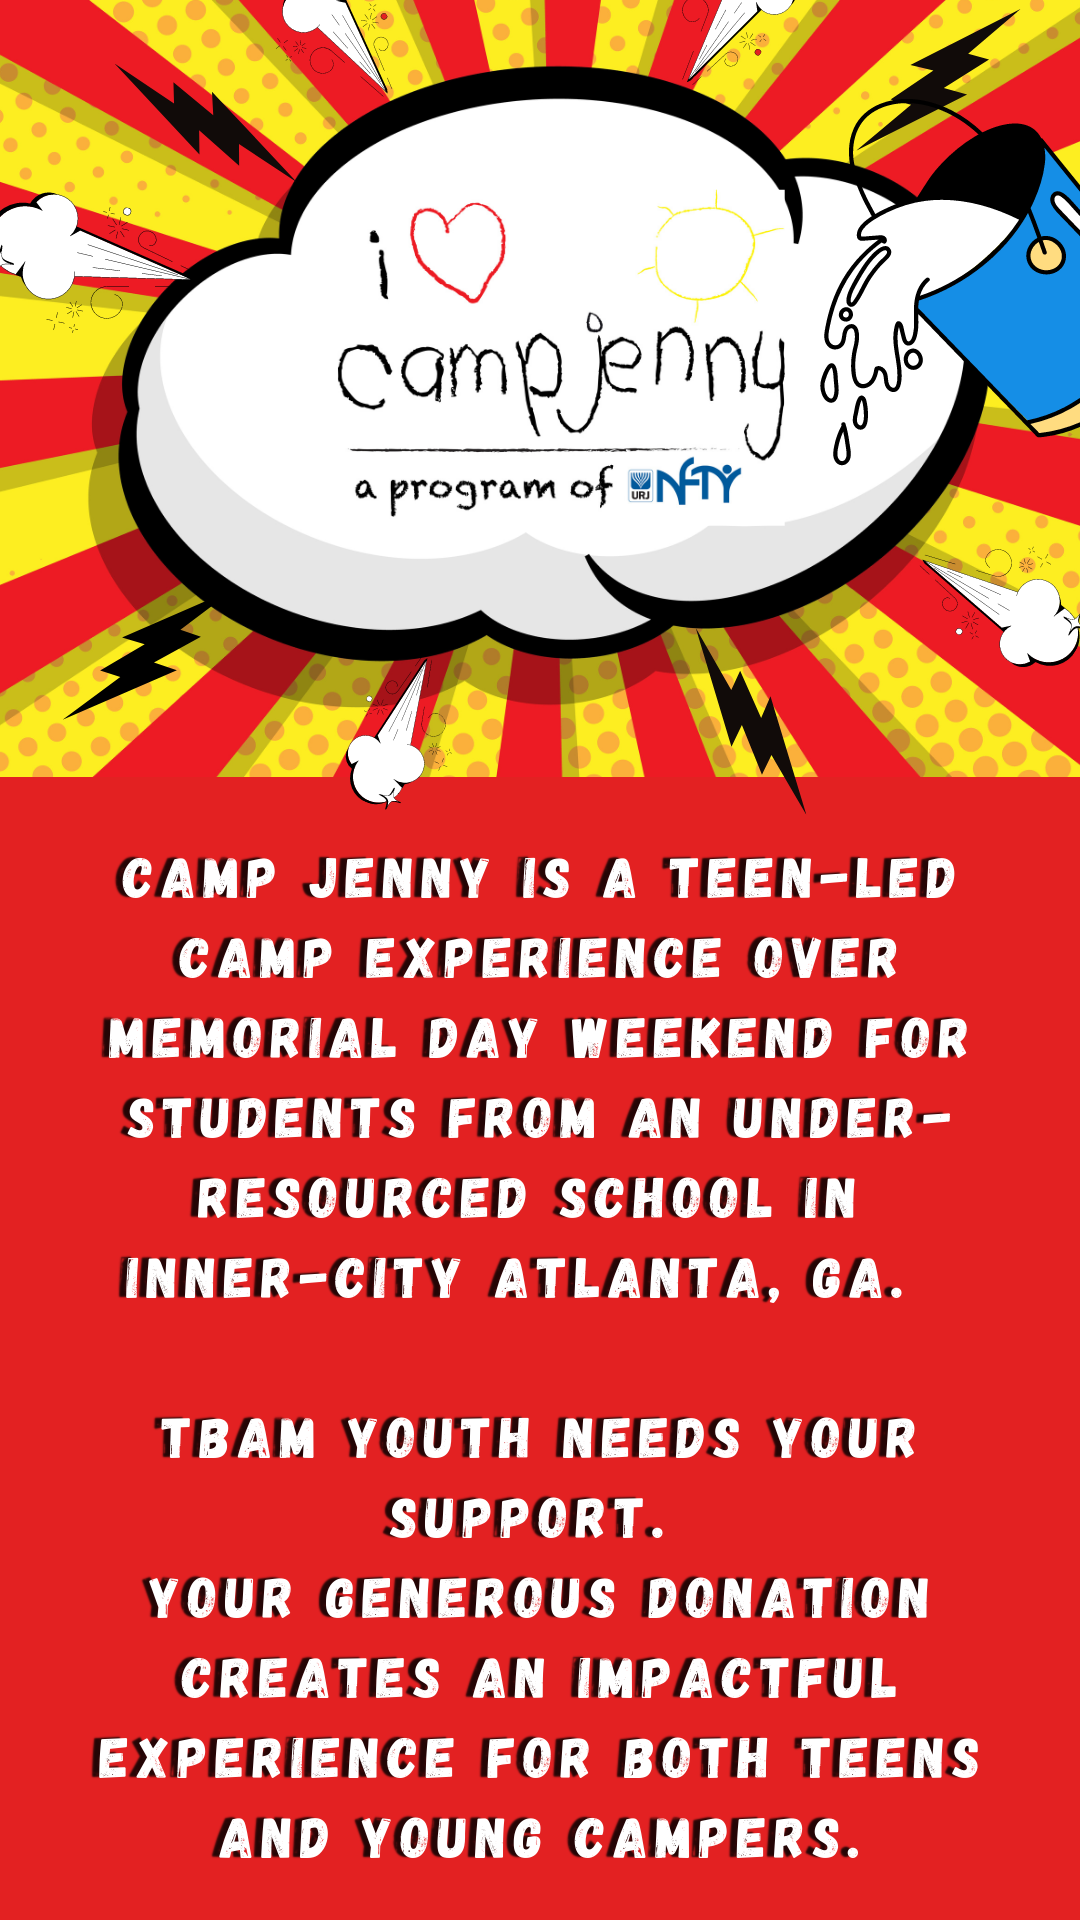 Camp Jenny Flyer. Camp Jenny, a program of NFTY, is a teen-led camp experience over Memorial Day Weekend for students from an under-resourced school in inner-city Atlanta, GA. TBAM youth needs your support. Your generous donation creates an impactful experience for both teens and young campers.